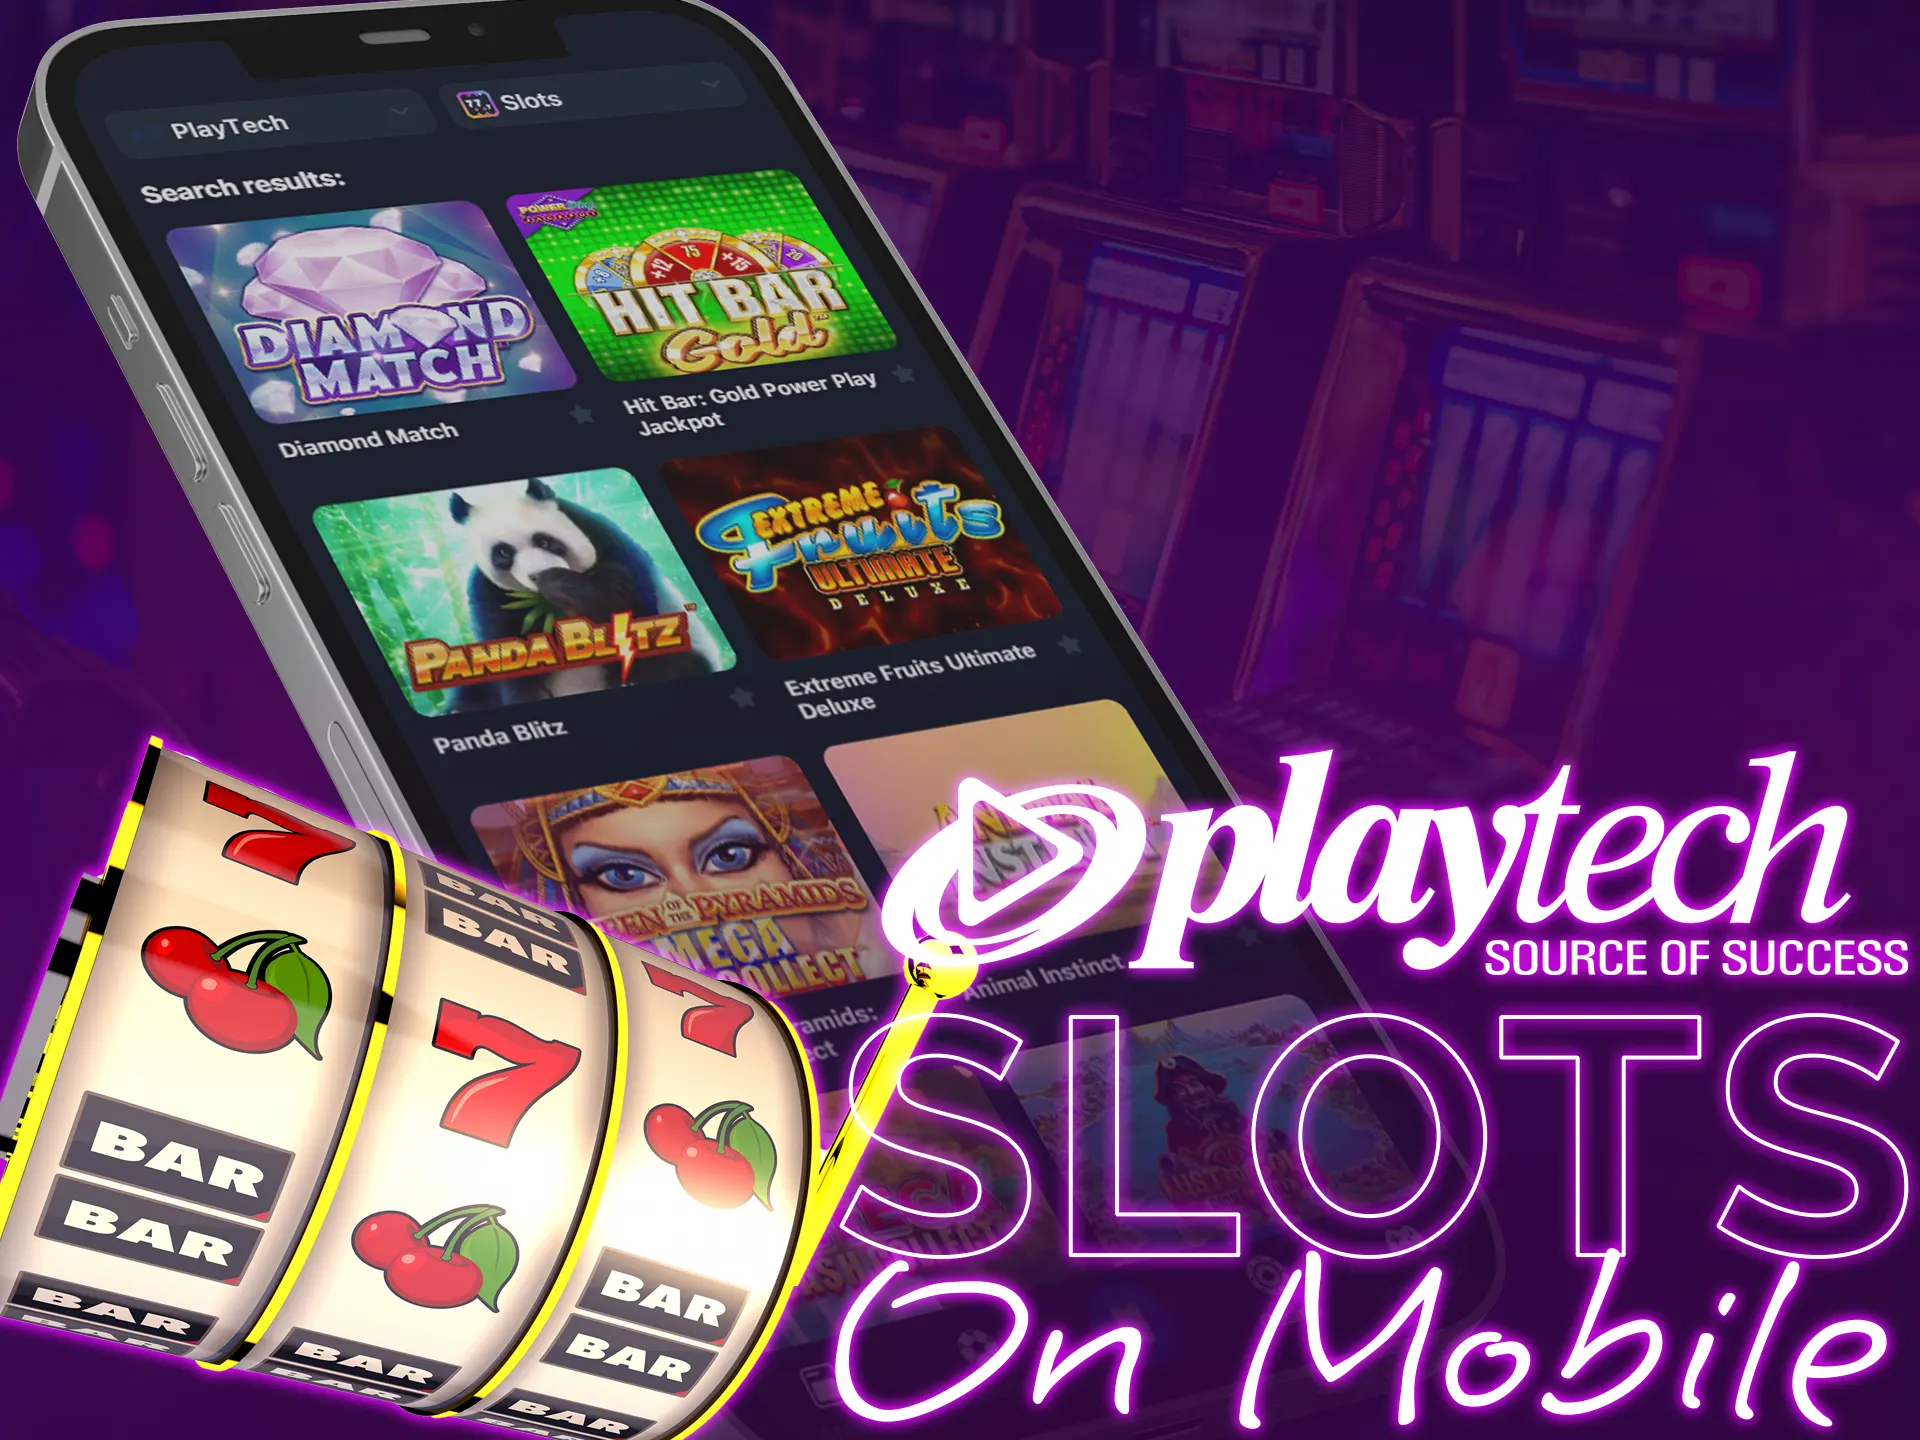 Use the option to play slots from mobile devices.